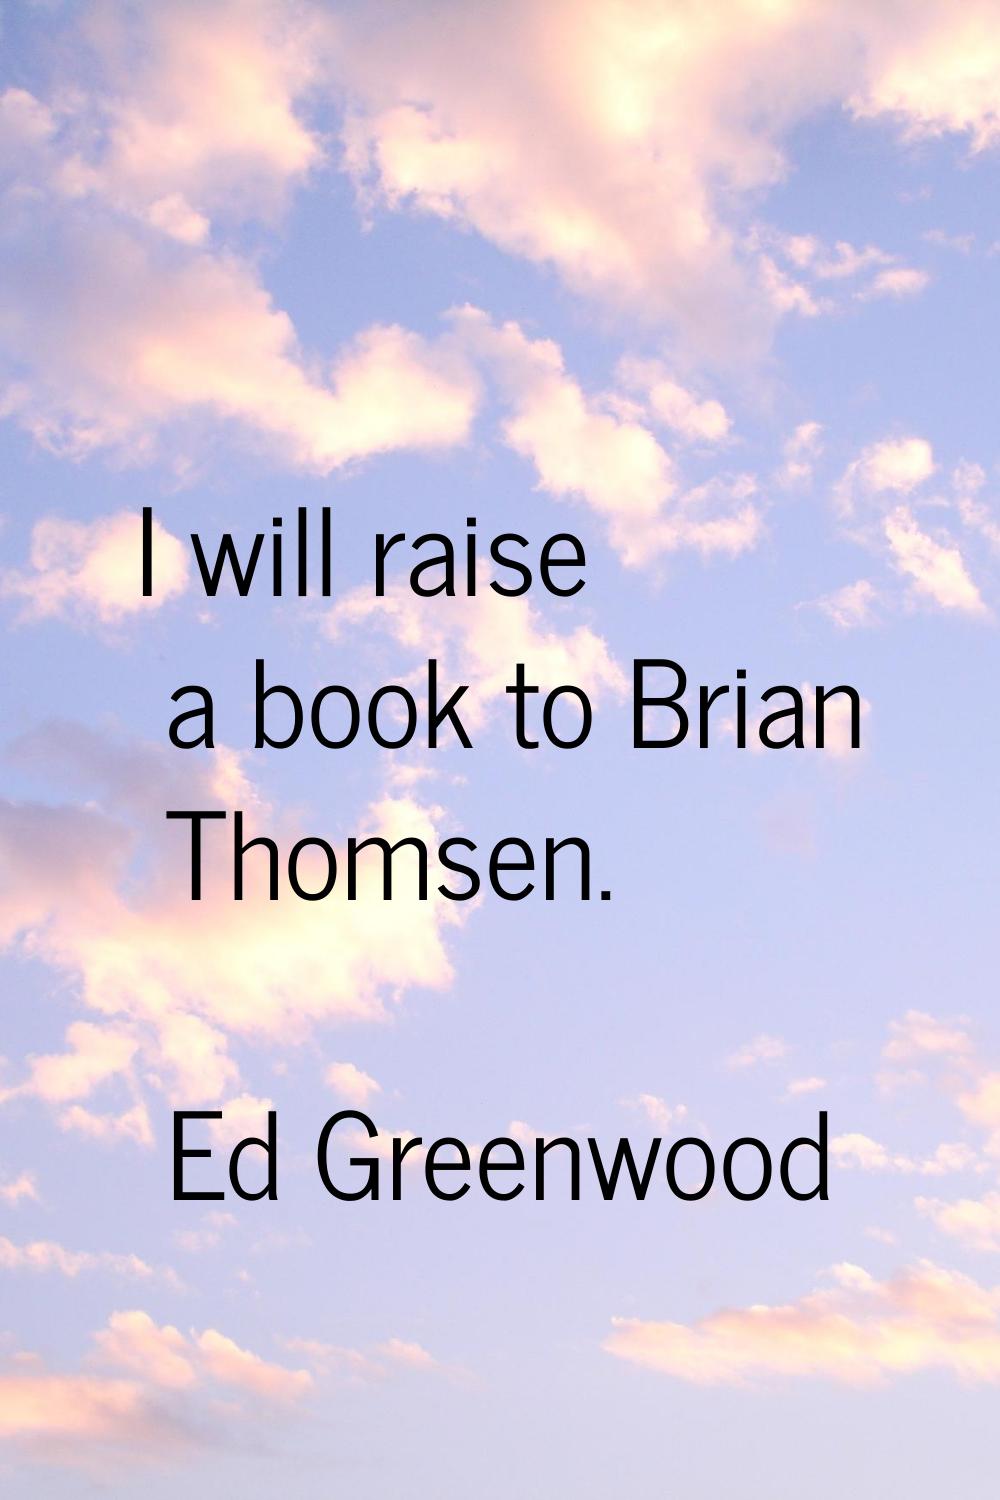 I will raise a book to Brian Thomsen.